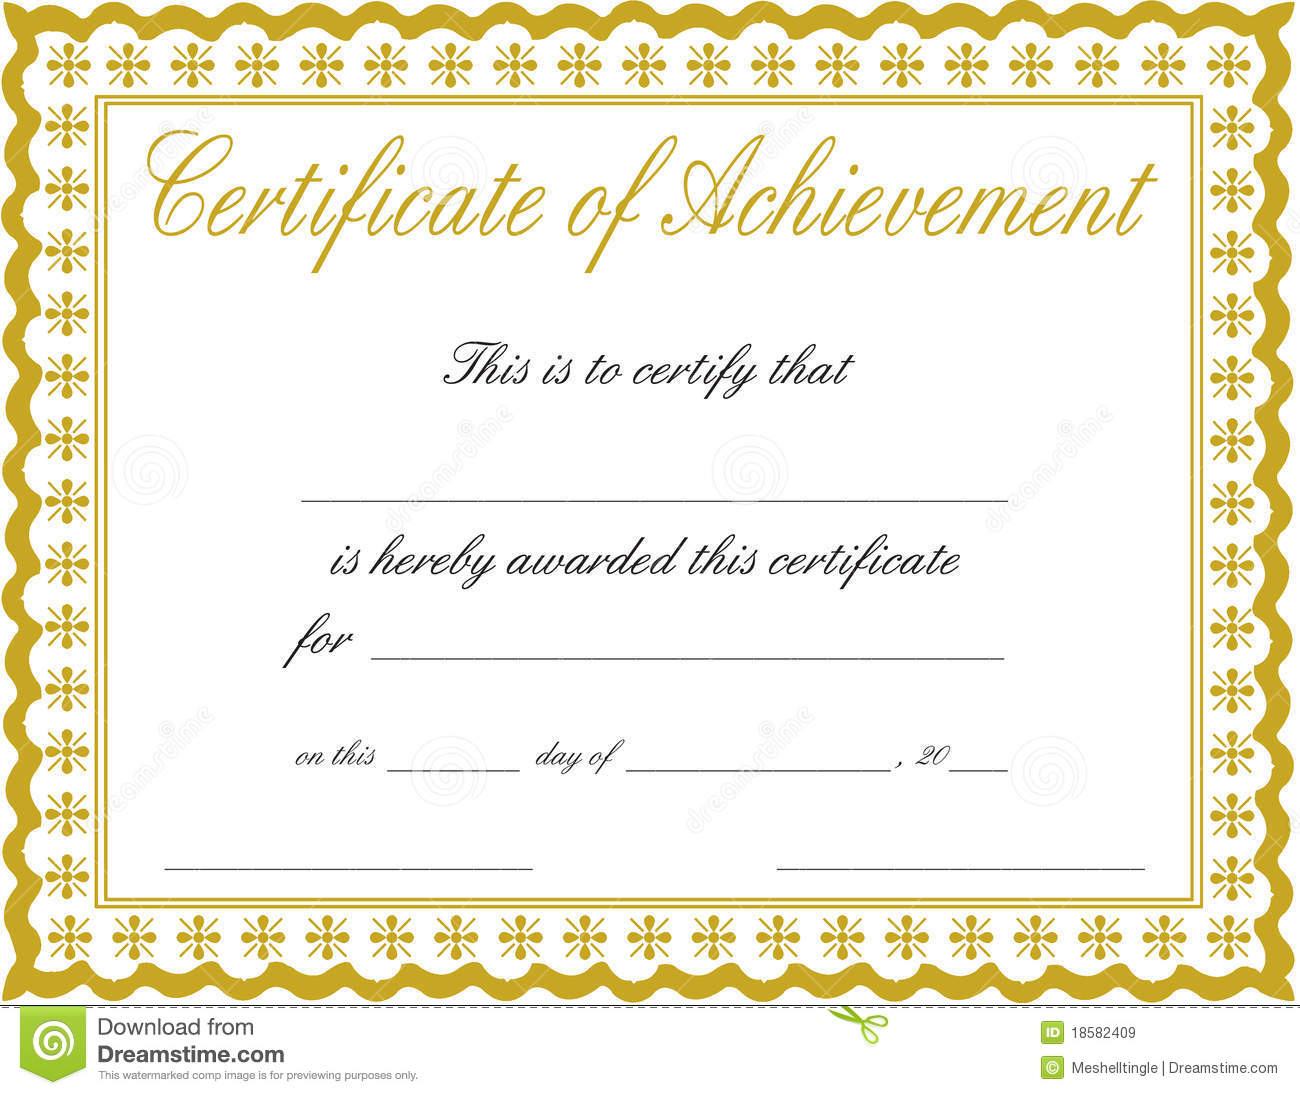 Certificate Of Achievement Stock Image. Image Of Bronze - 18582409 - Free Printable Blank Certificates Of Achievement